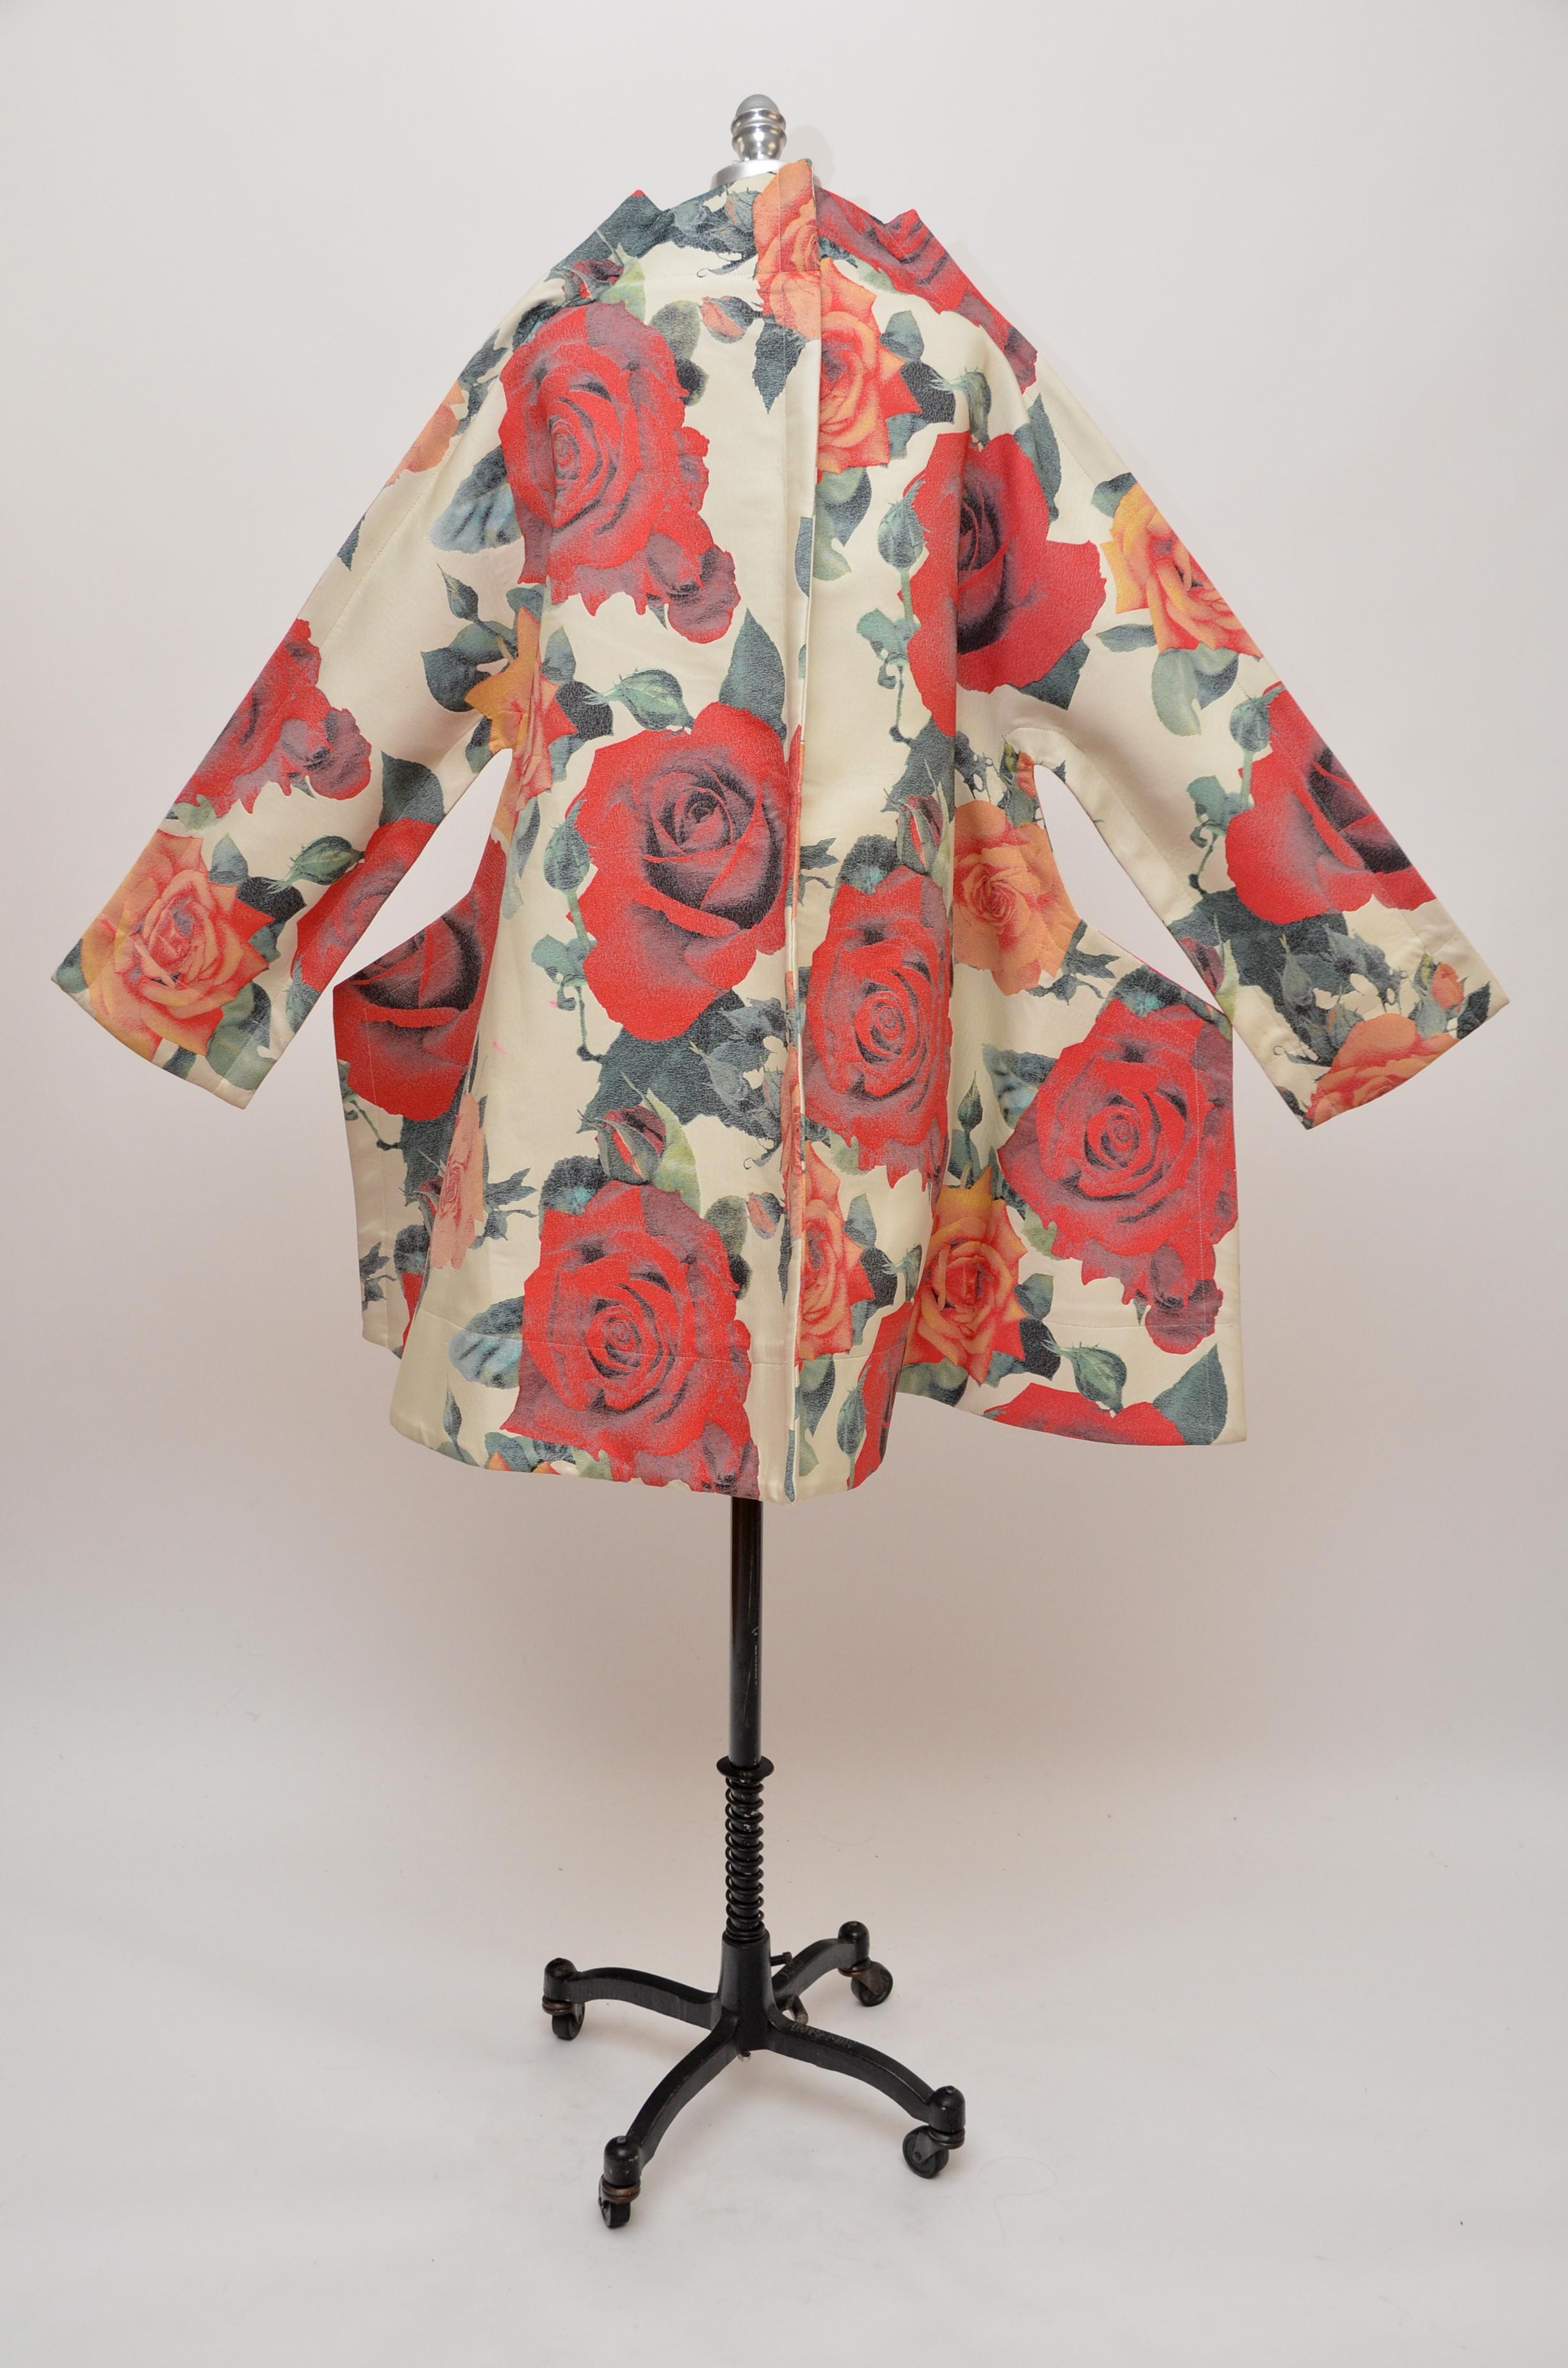 Comme Des Garcons roses print flat pack coat 2012 runway Sample.
Made in japan.
Same coat seen at Metropolitan Museum MET NY.
Condition:very good, few minor marks on fabric.Please see pictures.

FINAL SALE.
